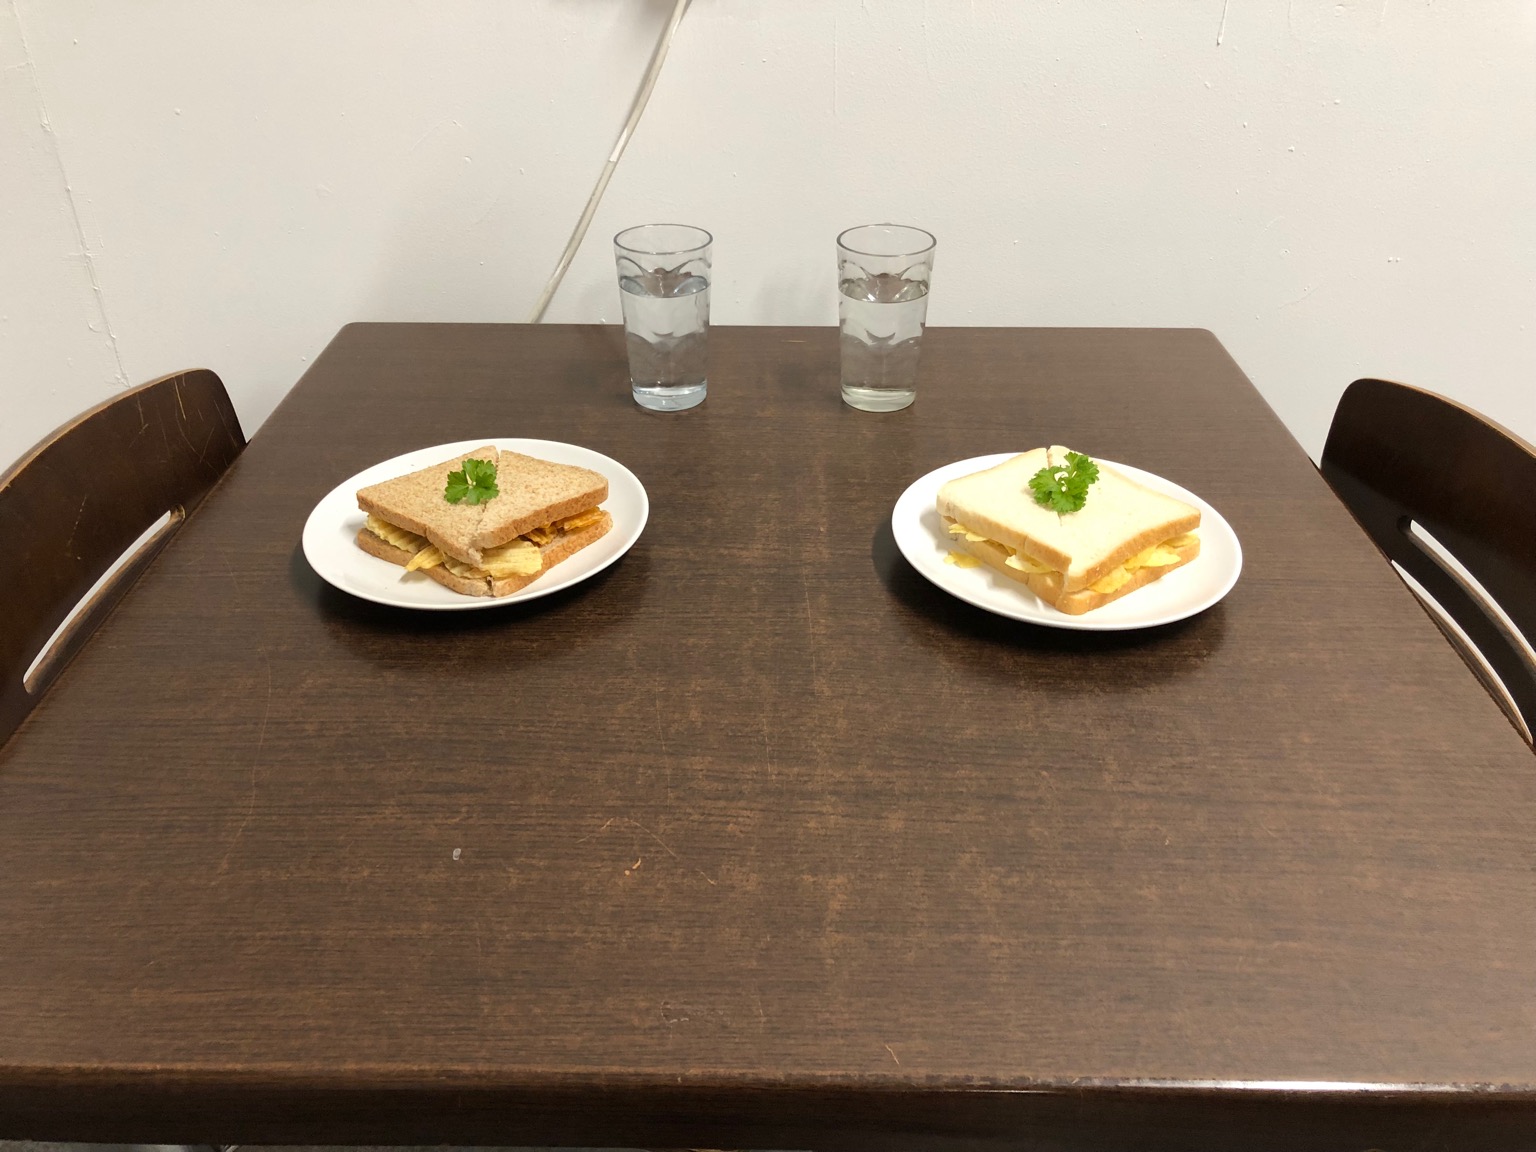 Brown and white crisp sandwiches on dining table